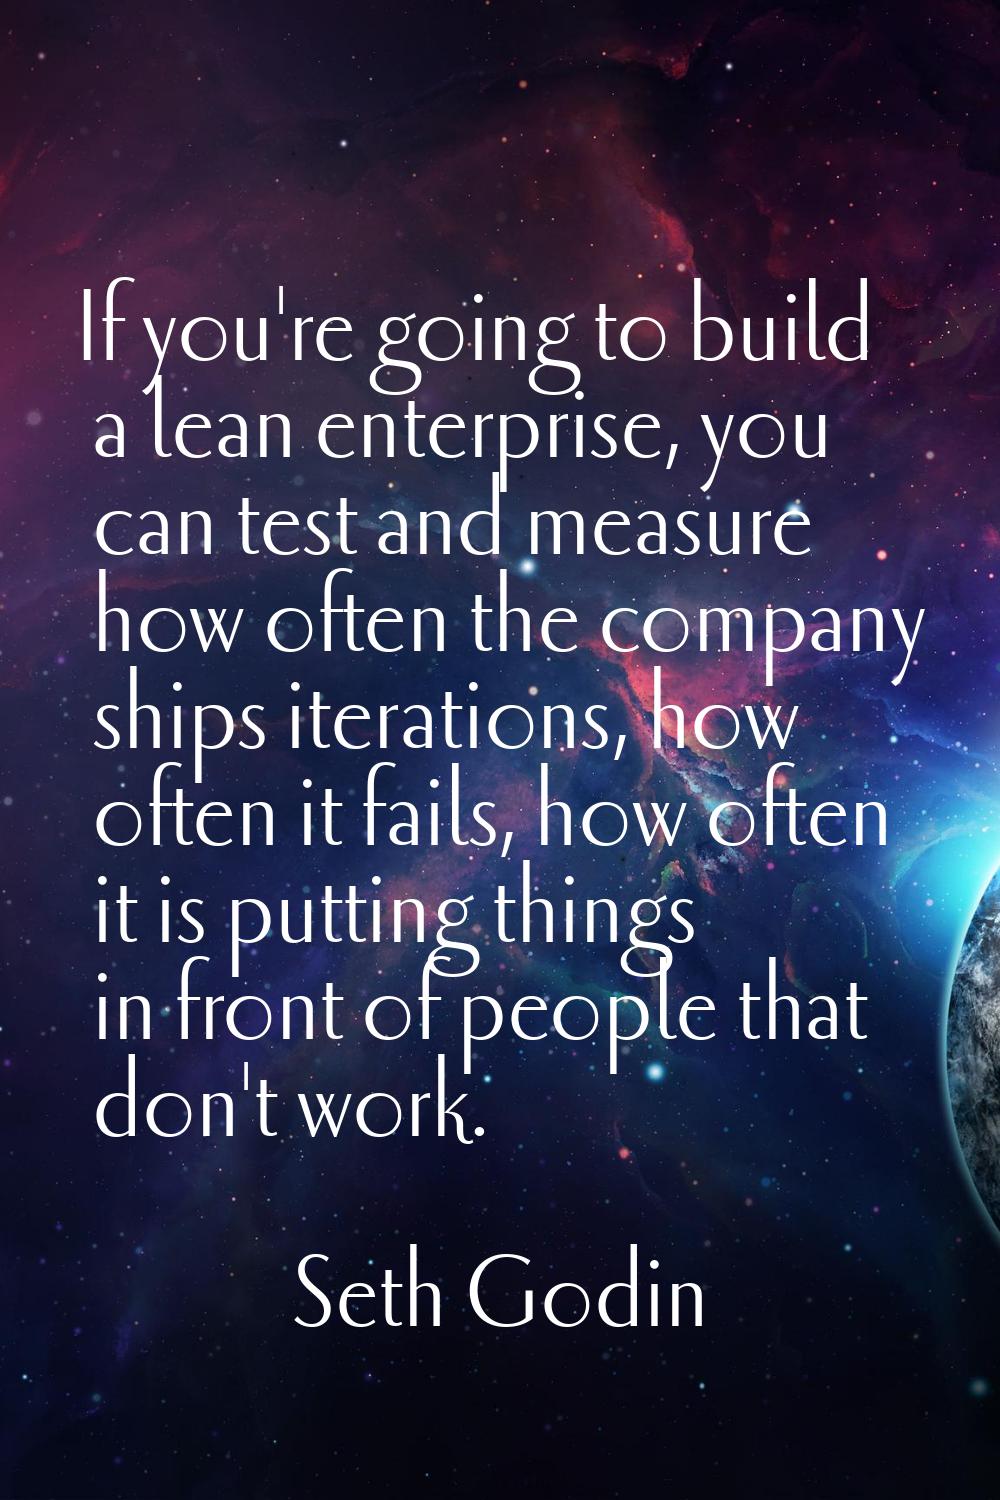 If you're going to build a lean enterprise, you can test and measure how often the company ships it